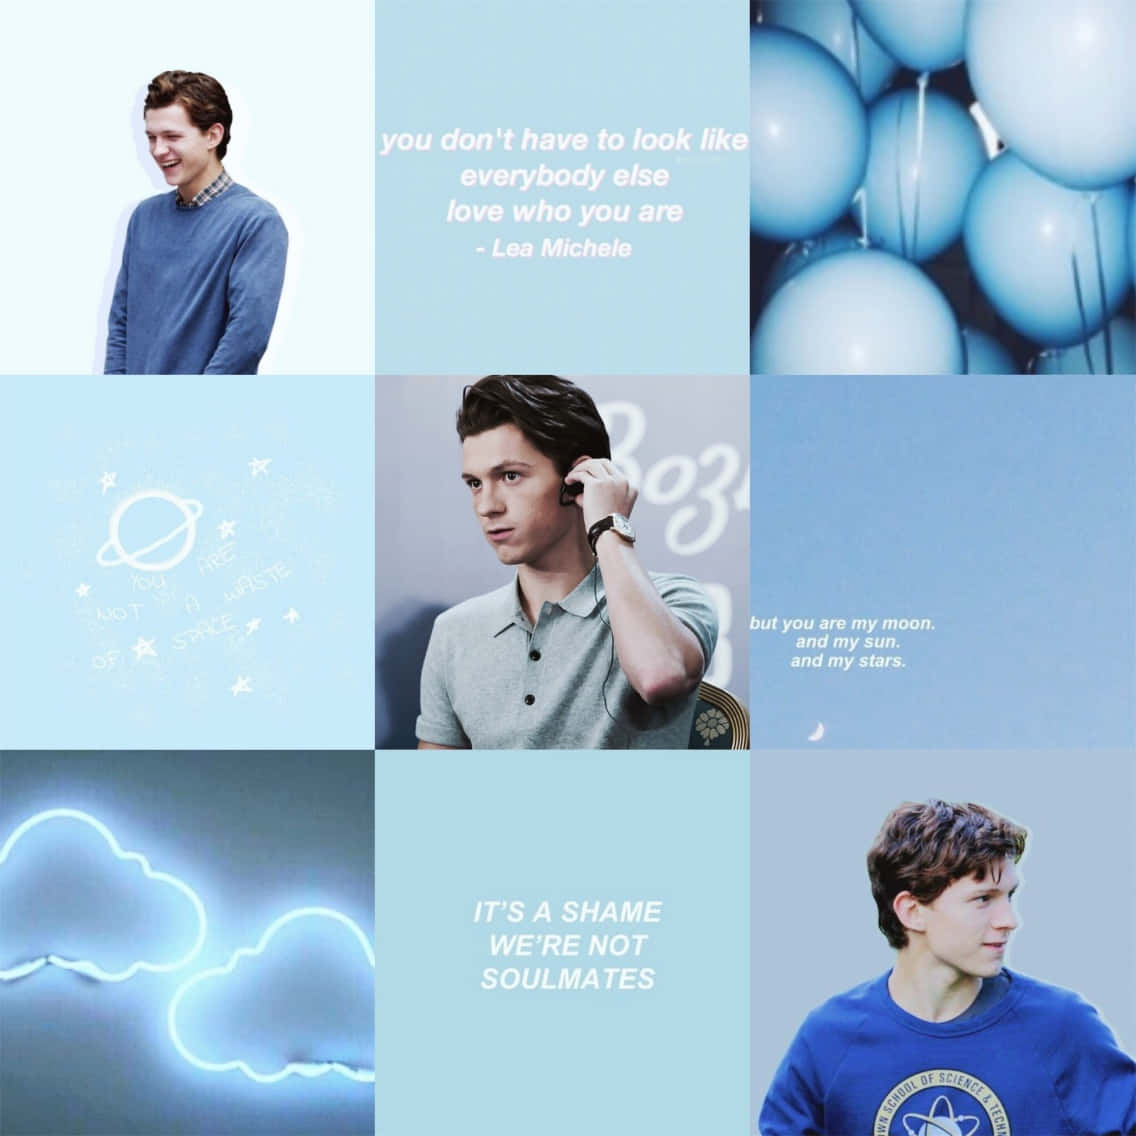 Tom Holland Aesthetic, Spiderman, It's a shame we're not soulmates, blue aesthetic - Tom Holland